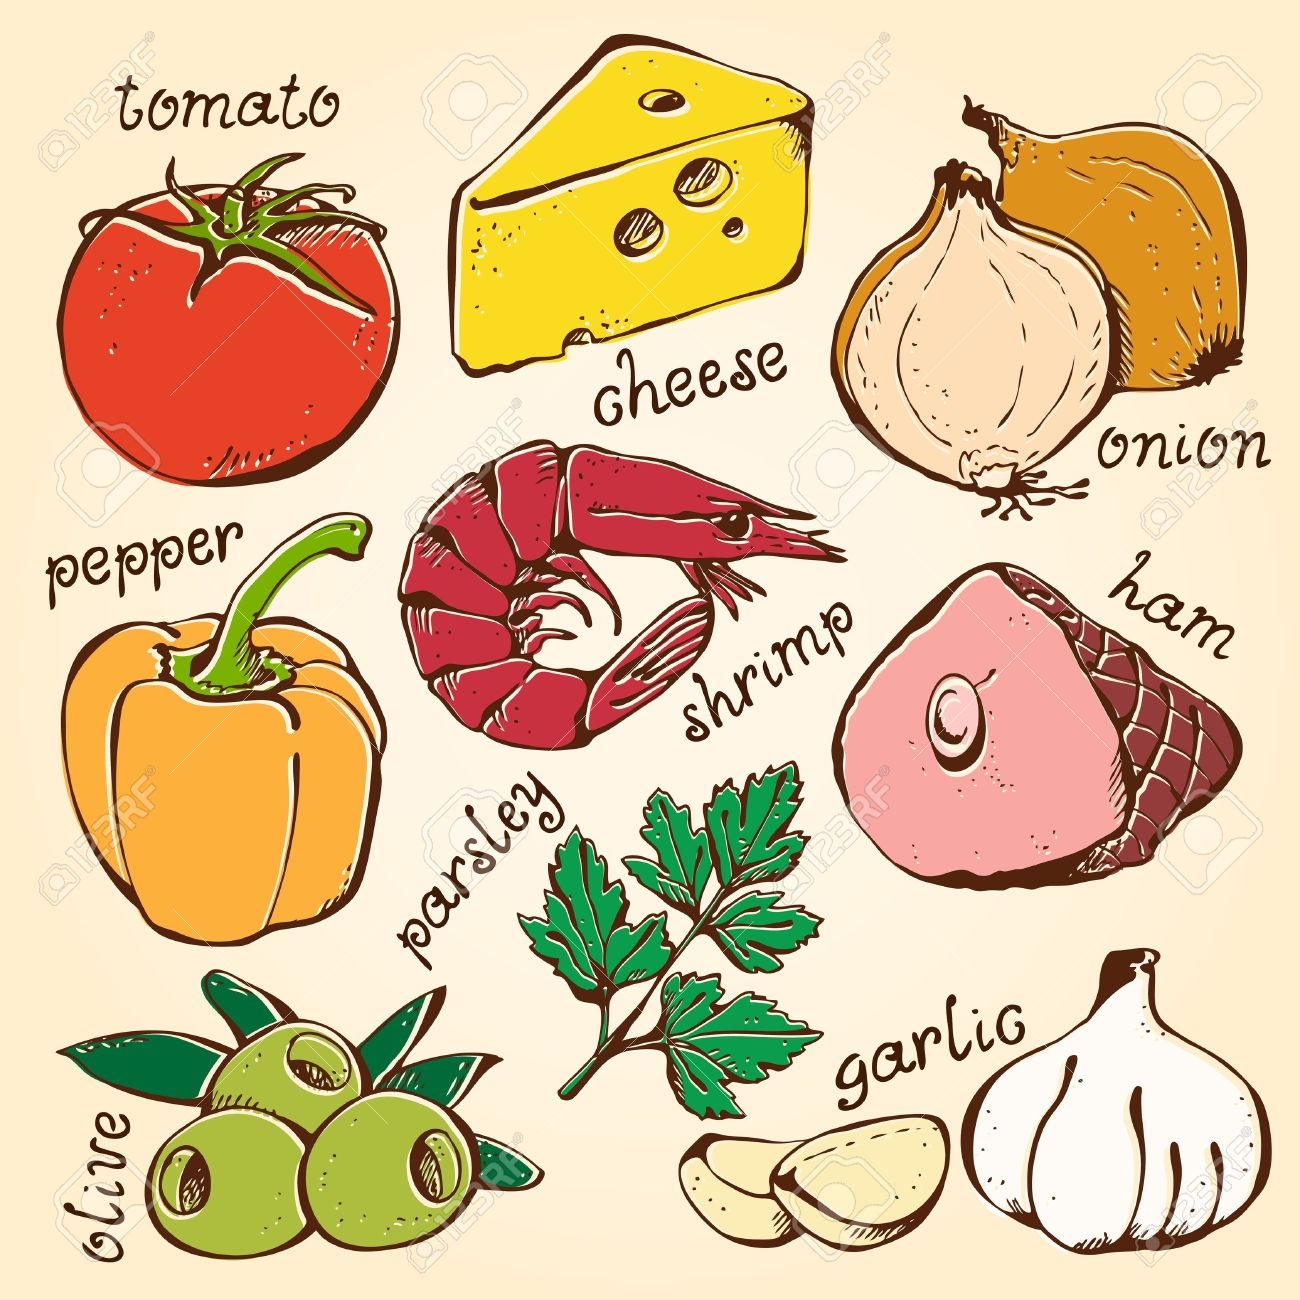 pizza ingredients clipart - photo #4